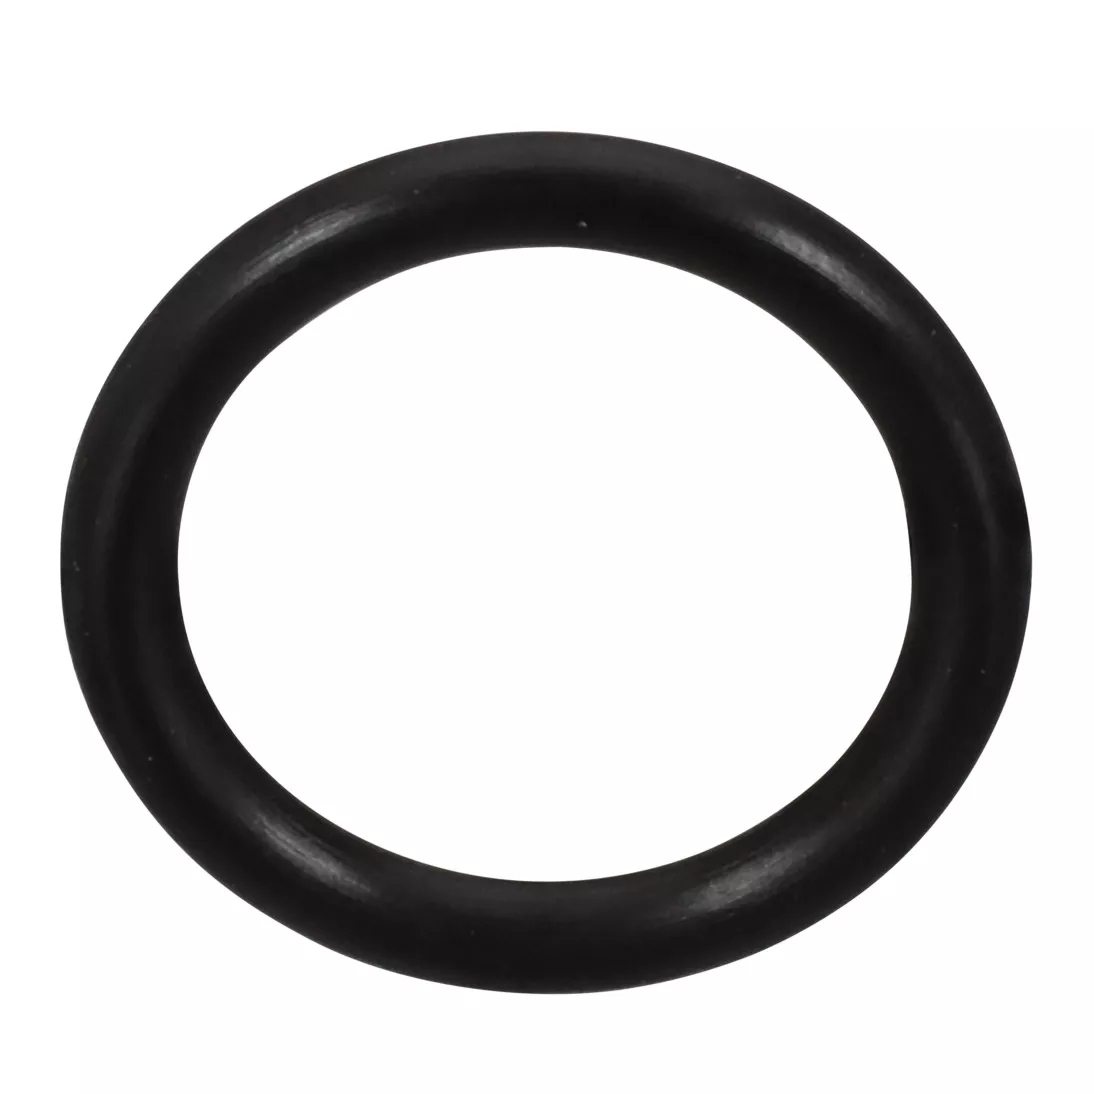 3M™ O-Ring A0043, 9 mm x 1-1/2 mm